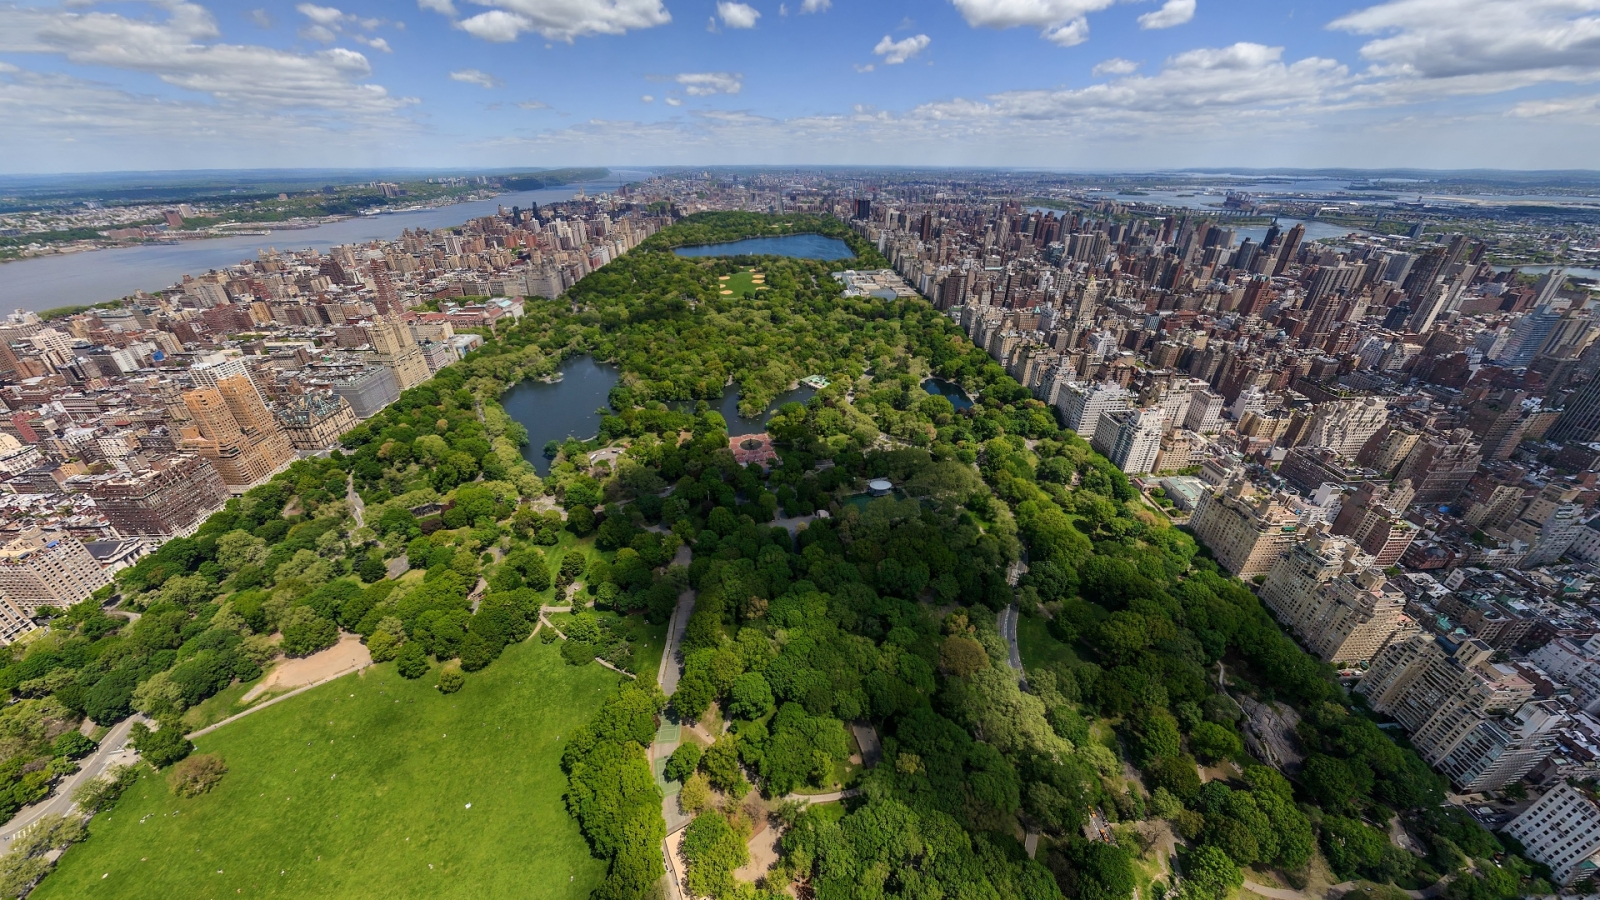 1600x900 Resolution new york, central park, top view 1600x900 ...